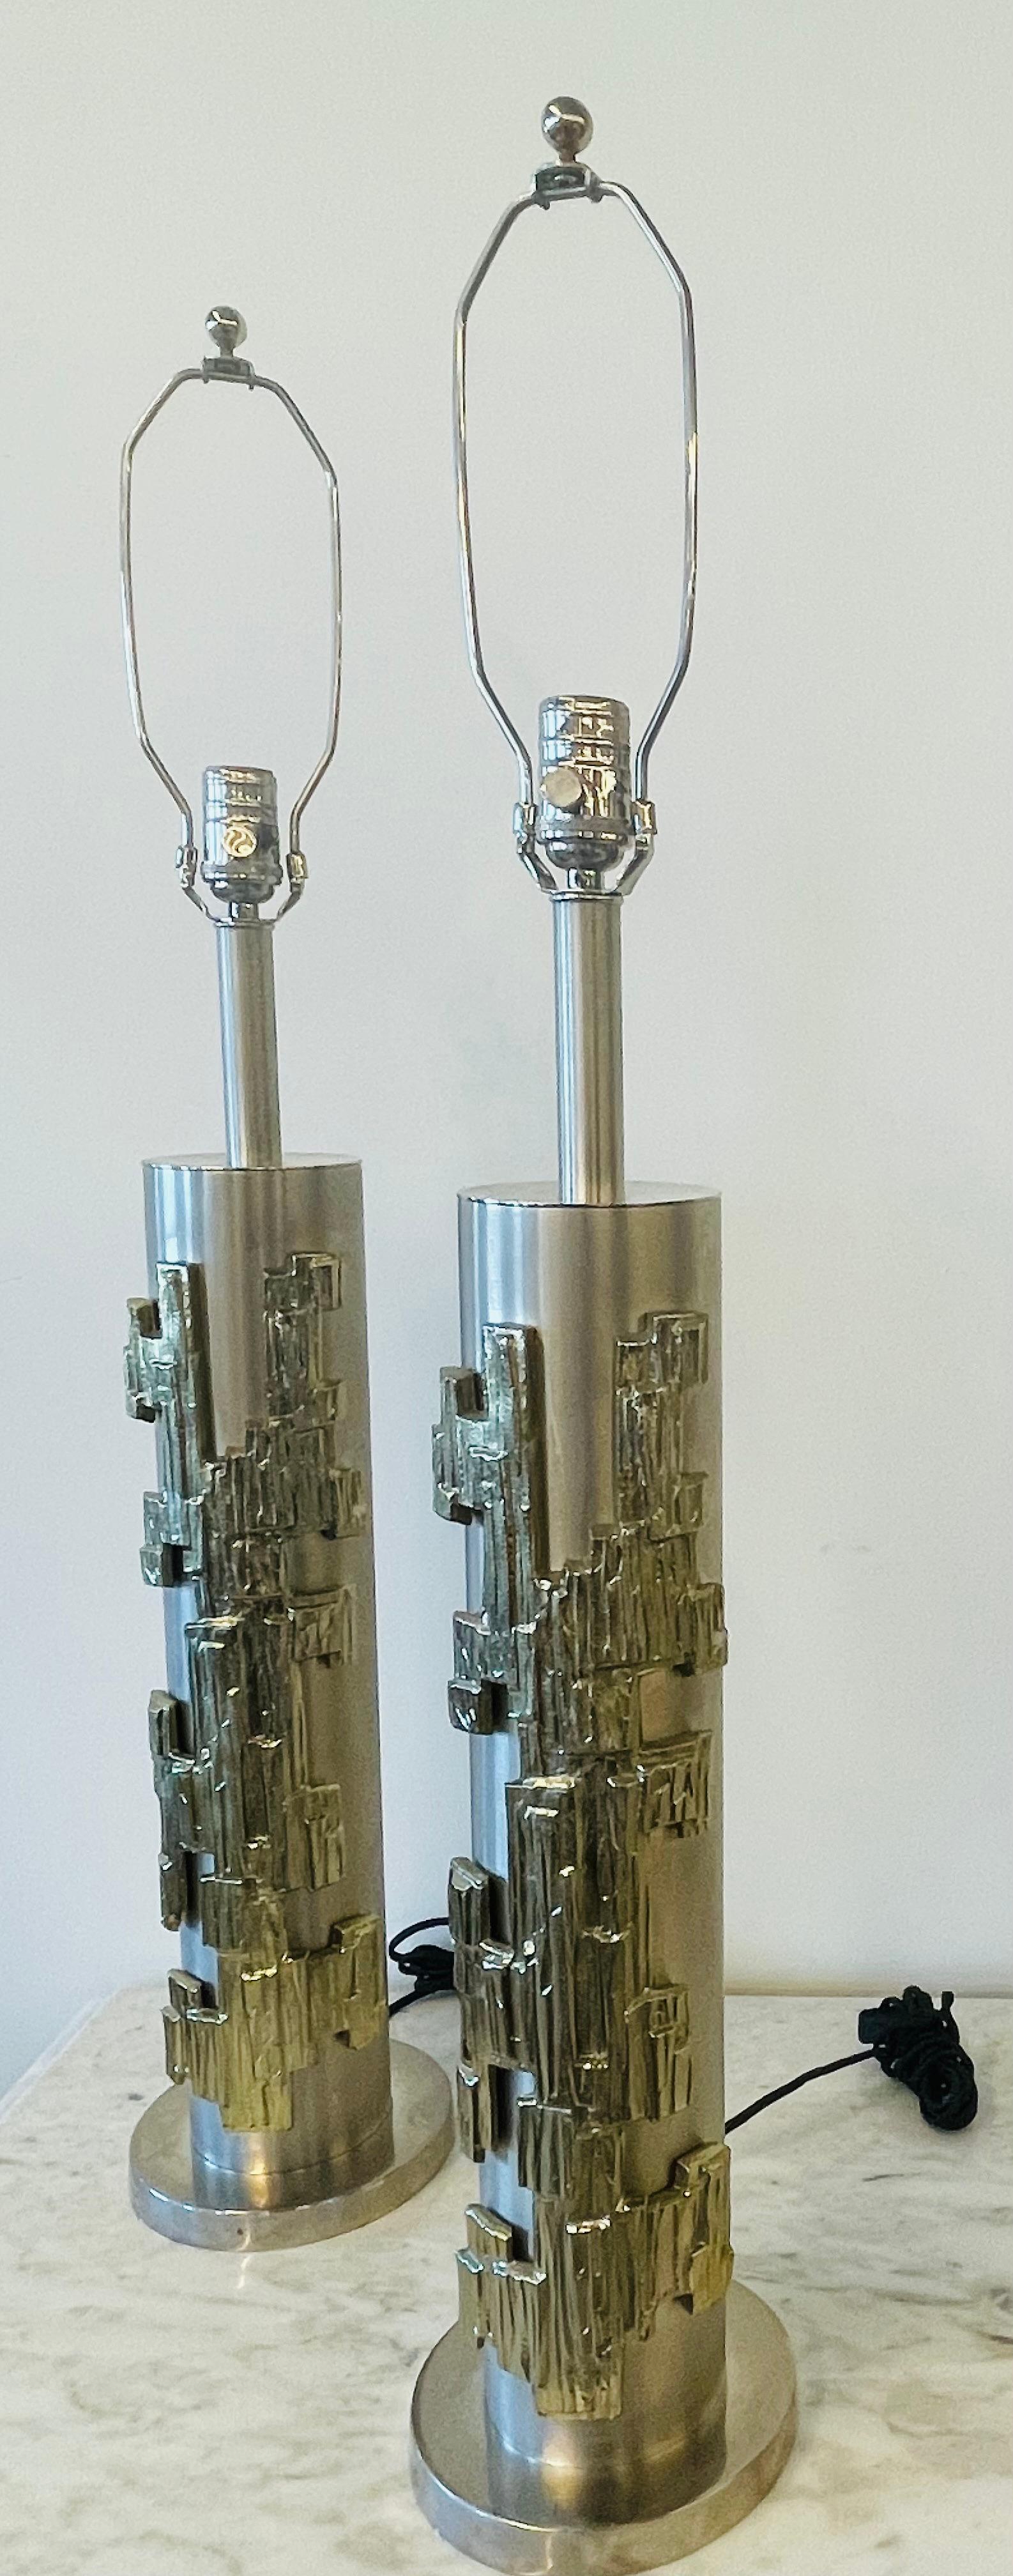 Mid-Century Modern Pair of Modernist Table Lamps, Brushed Nickel and Sculptural Metal, 1970s For Sale